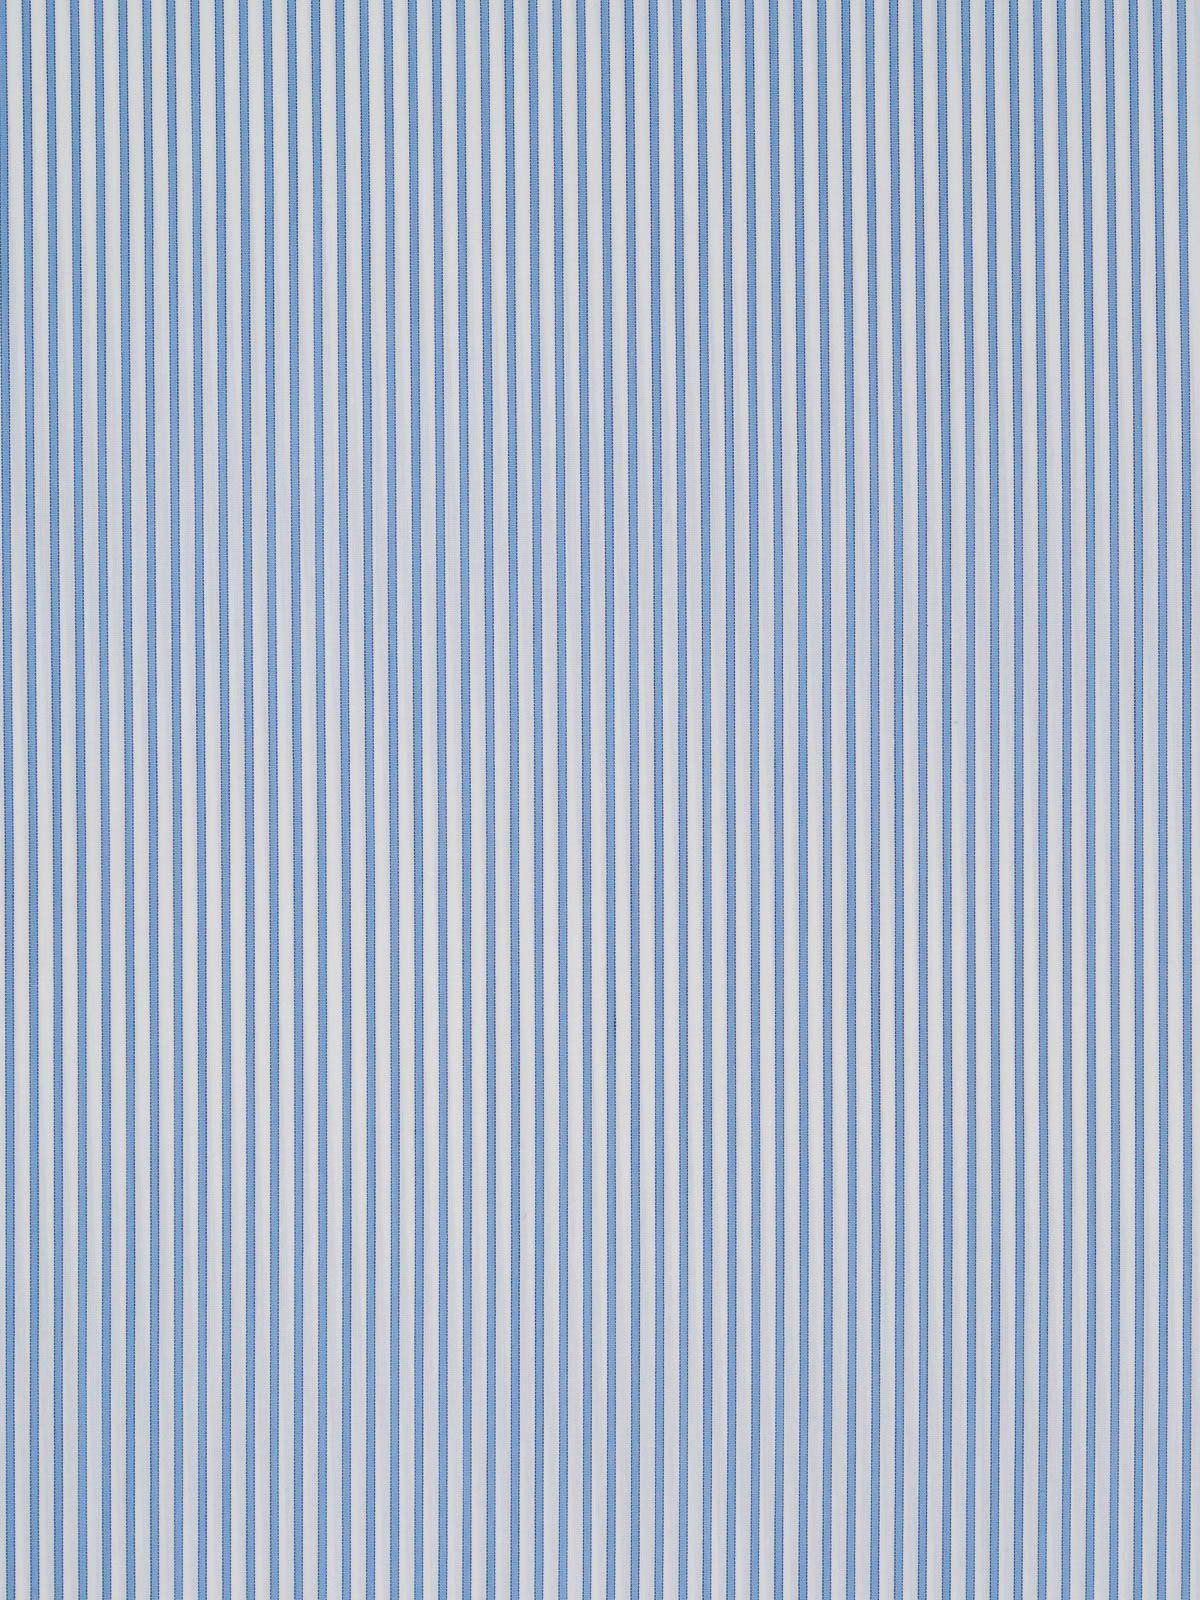 Blue and White Line Logo - 100% Cotton Twill Fabric – Narrow Stripes – White, Pale Blue and ...